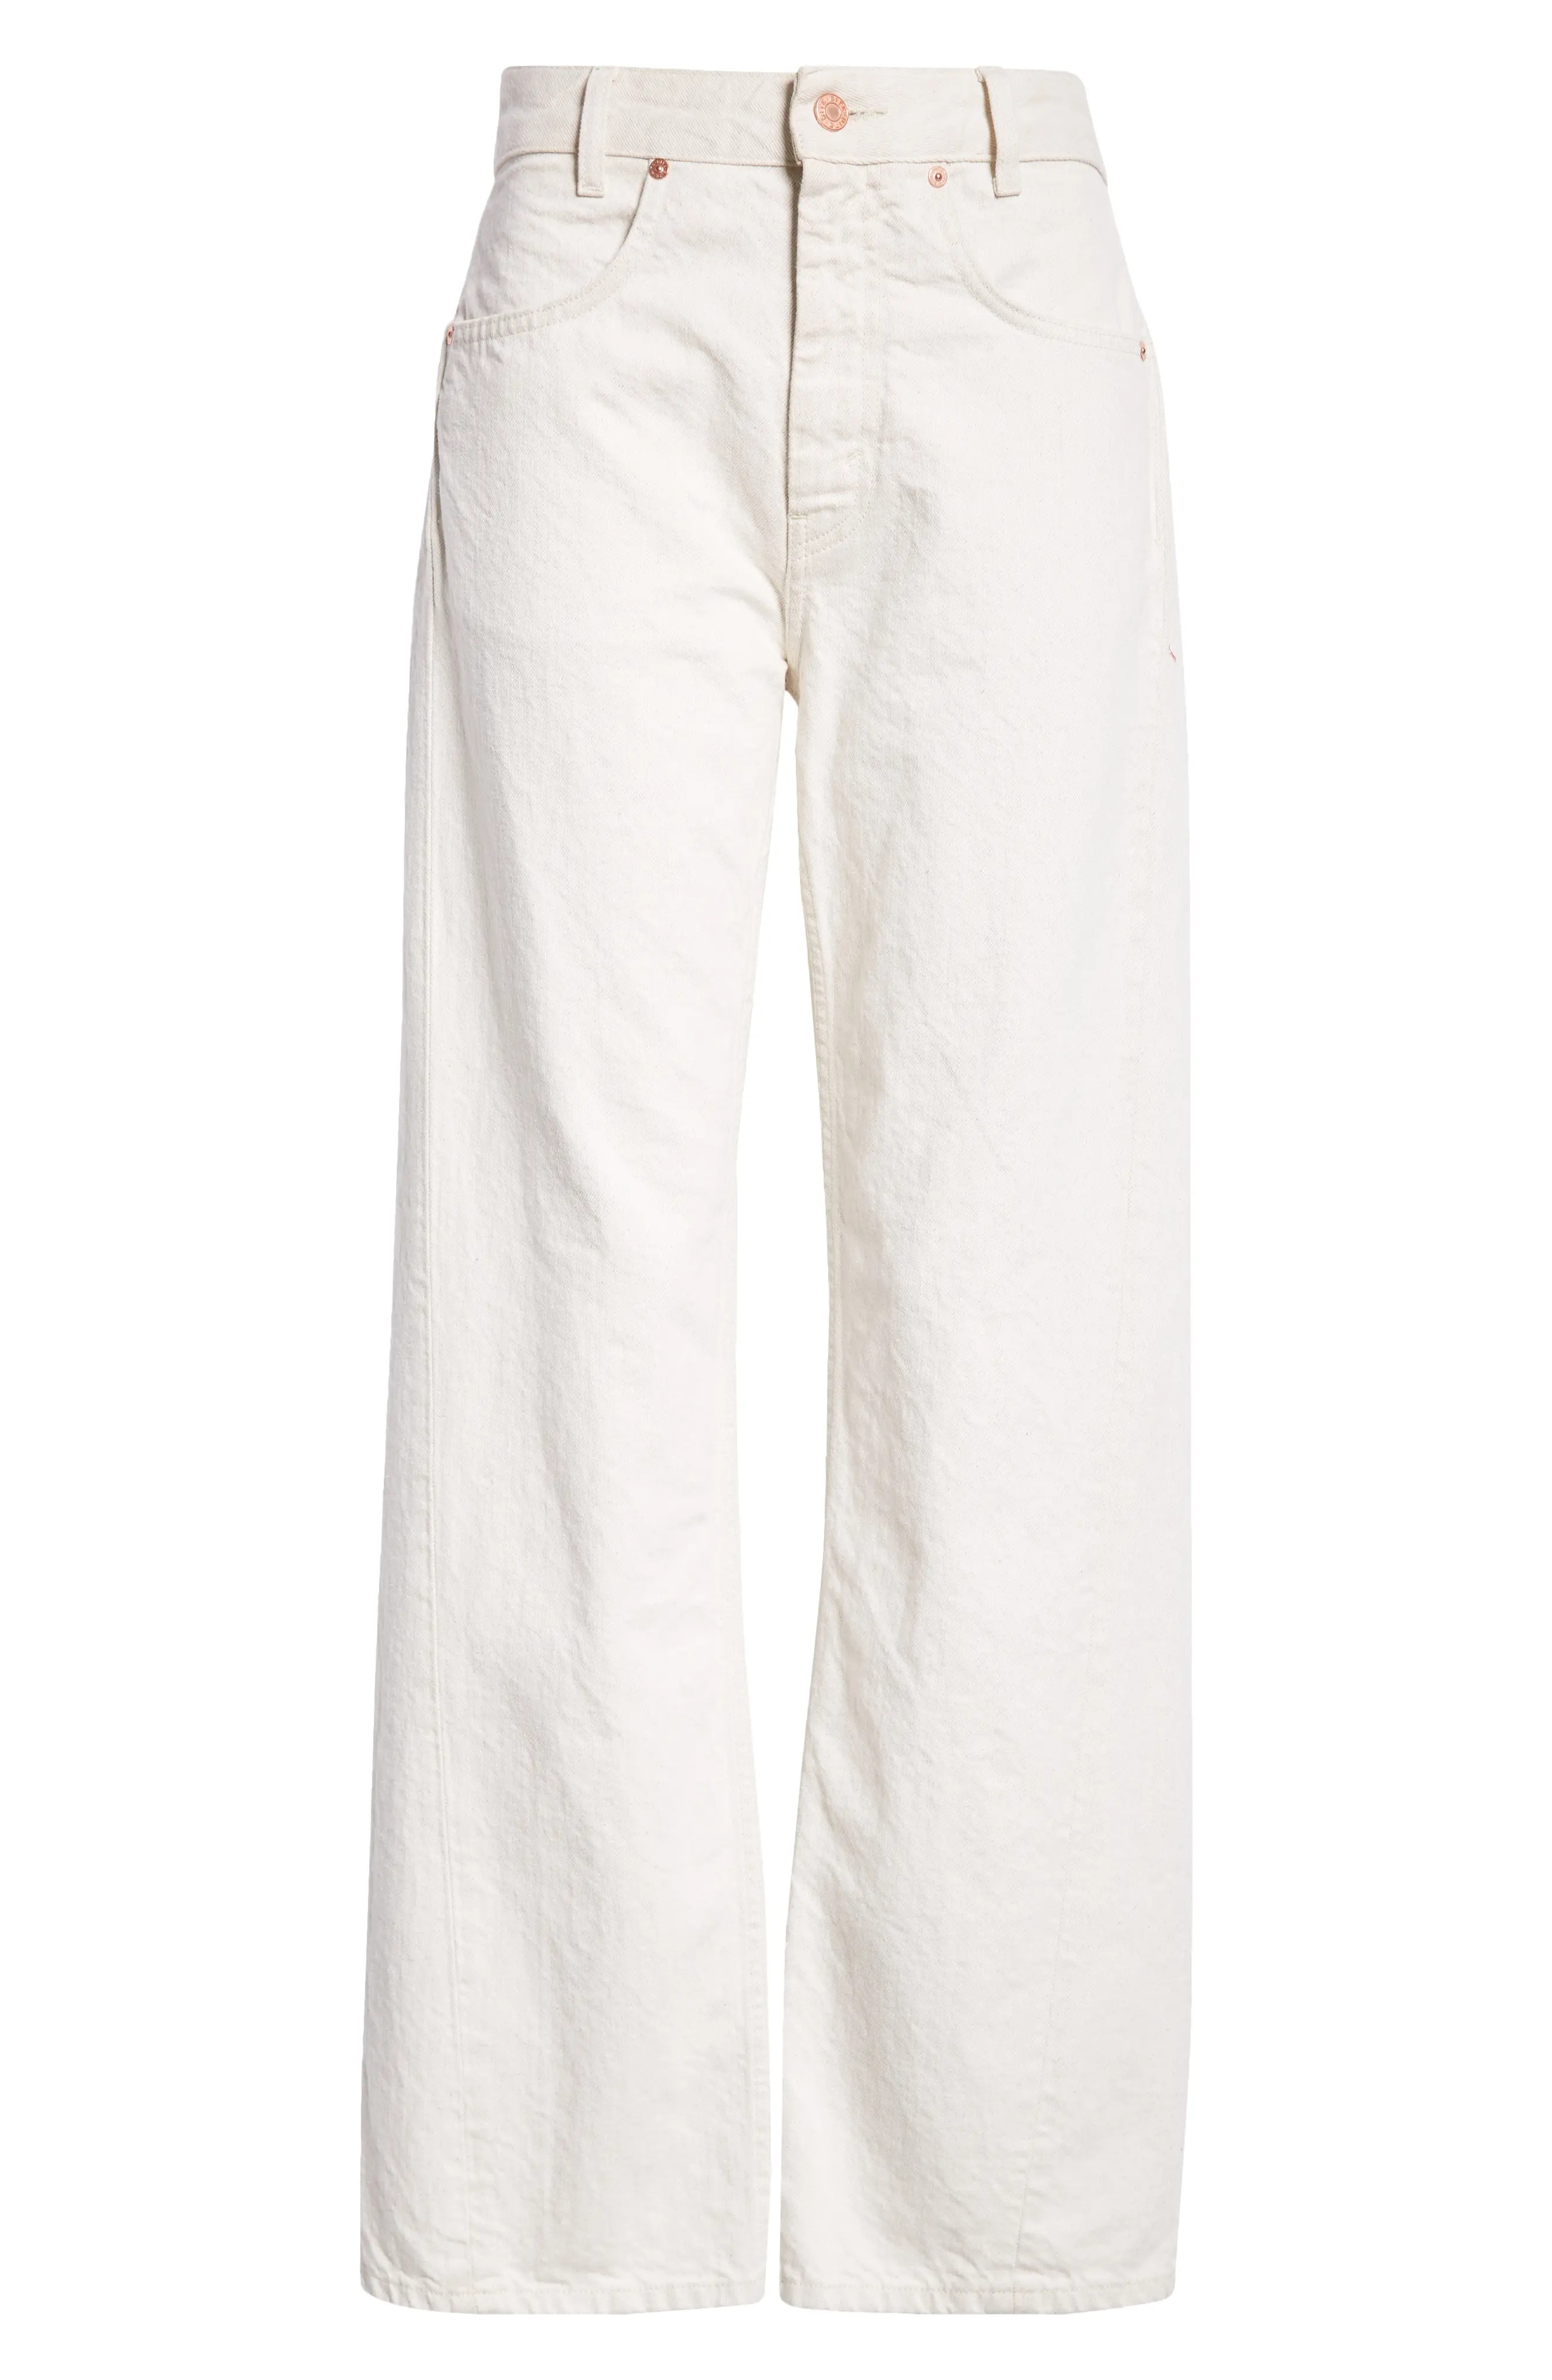 Curved Organic Cotton & Linen Jeans - 6